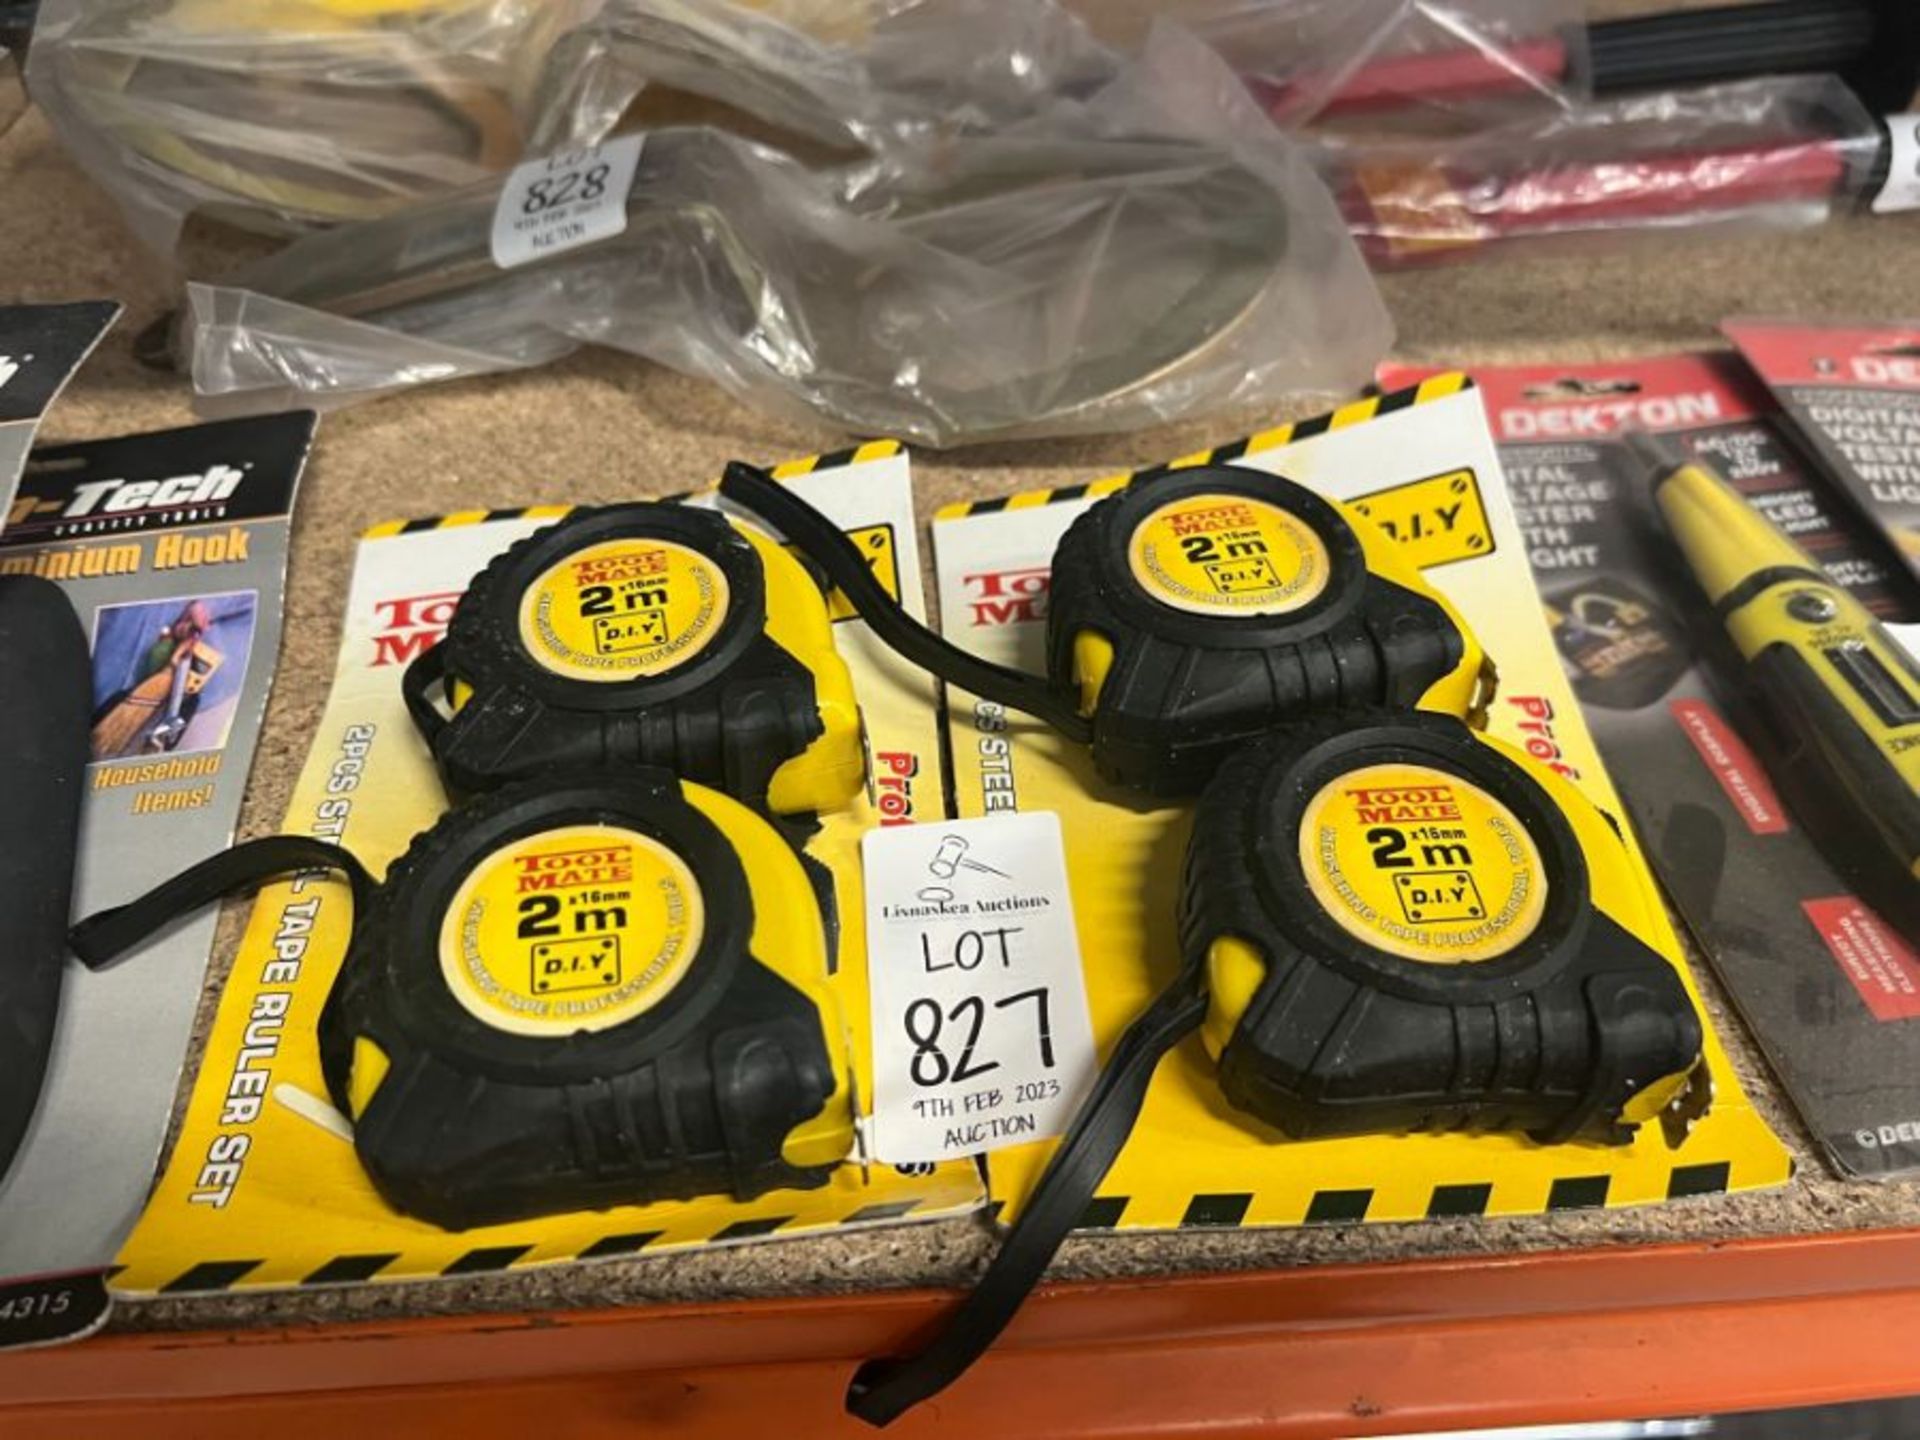 4X TOOL MATE 2M MEASURING TAPES (NEW)